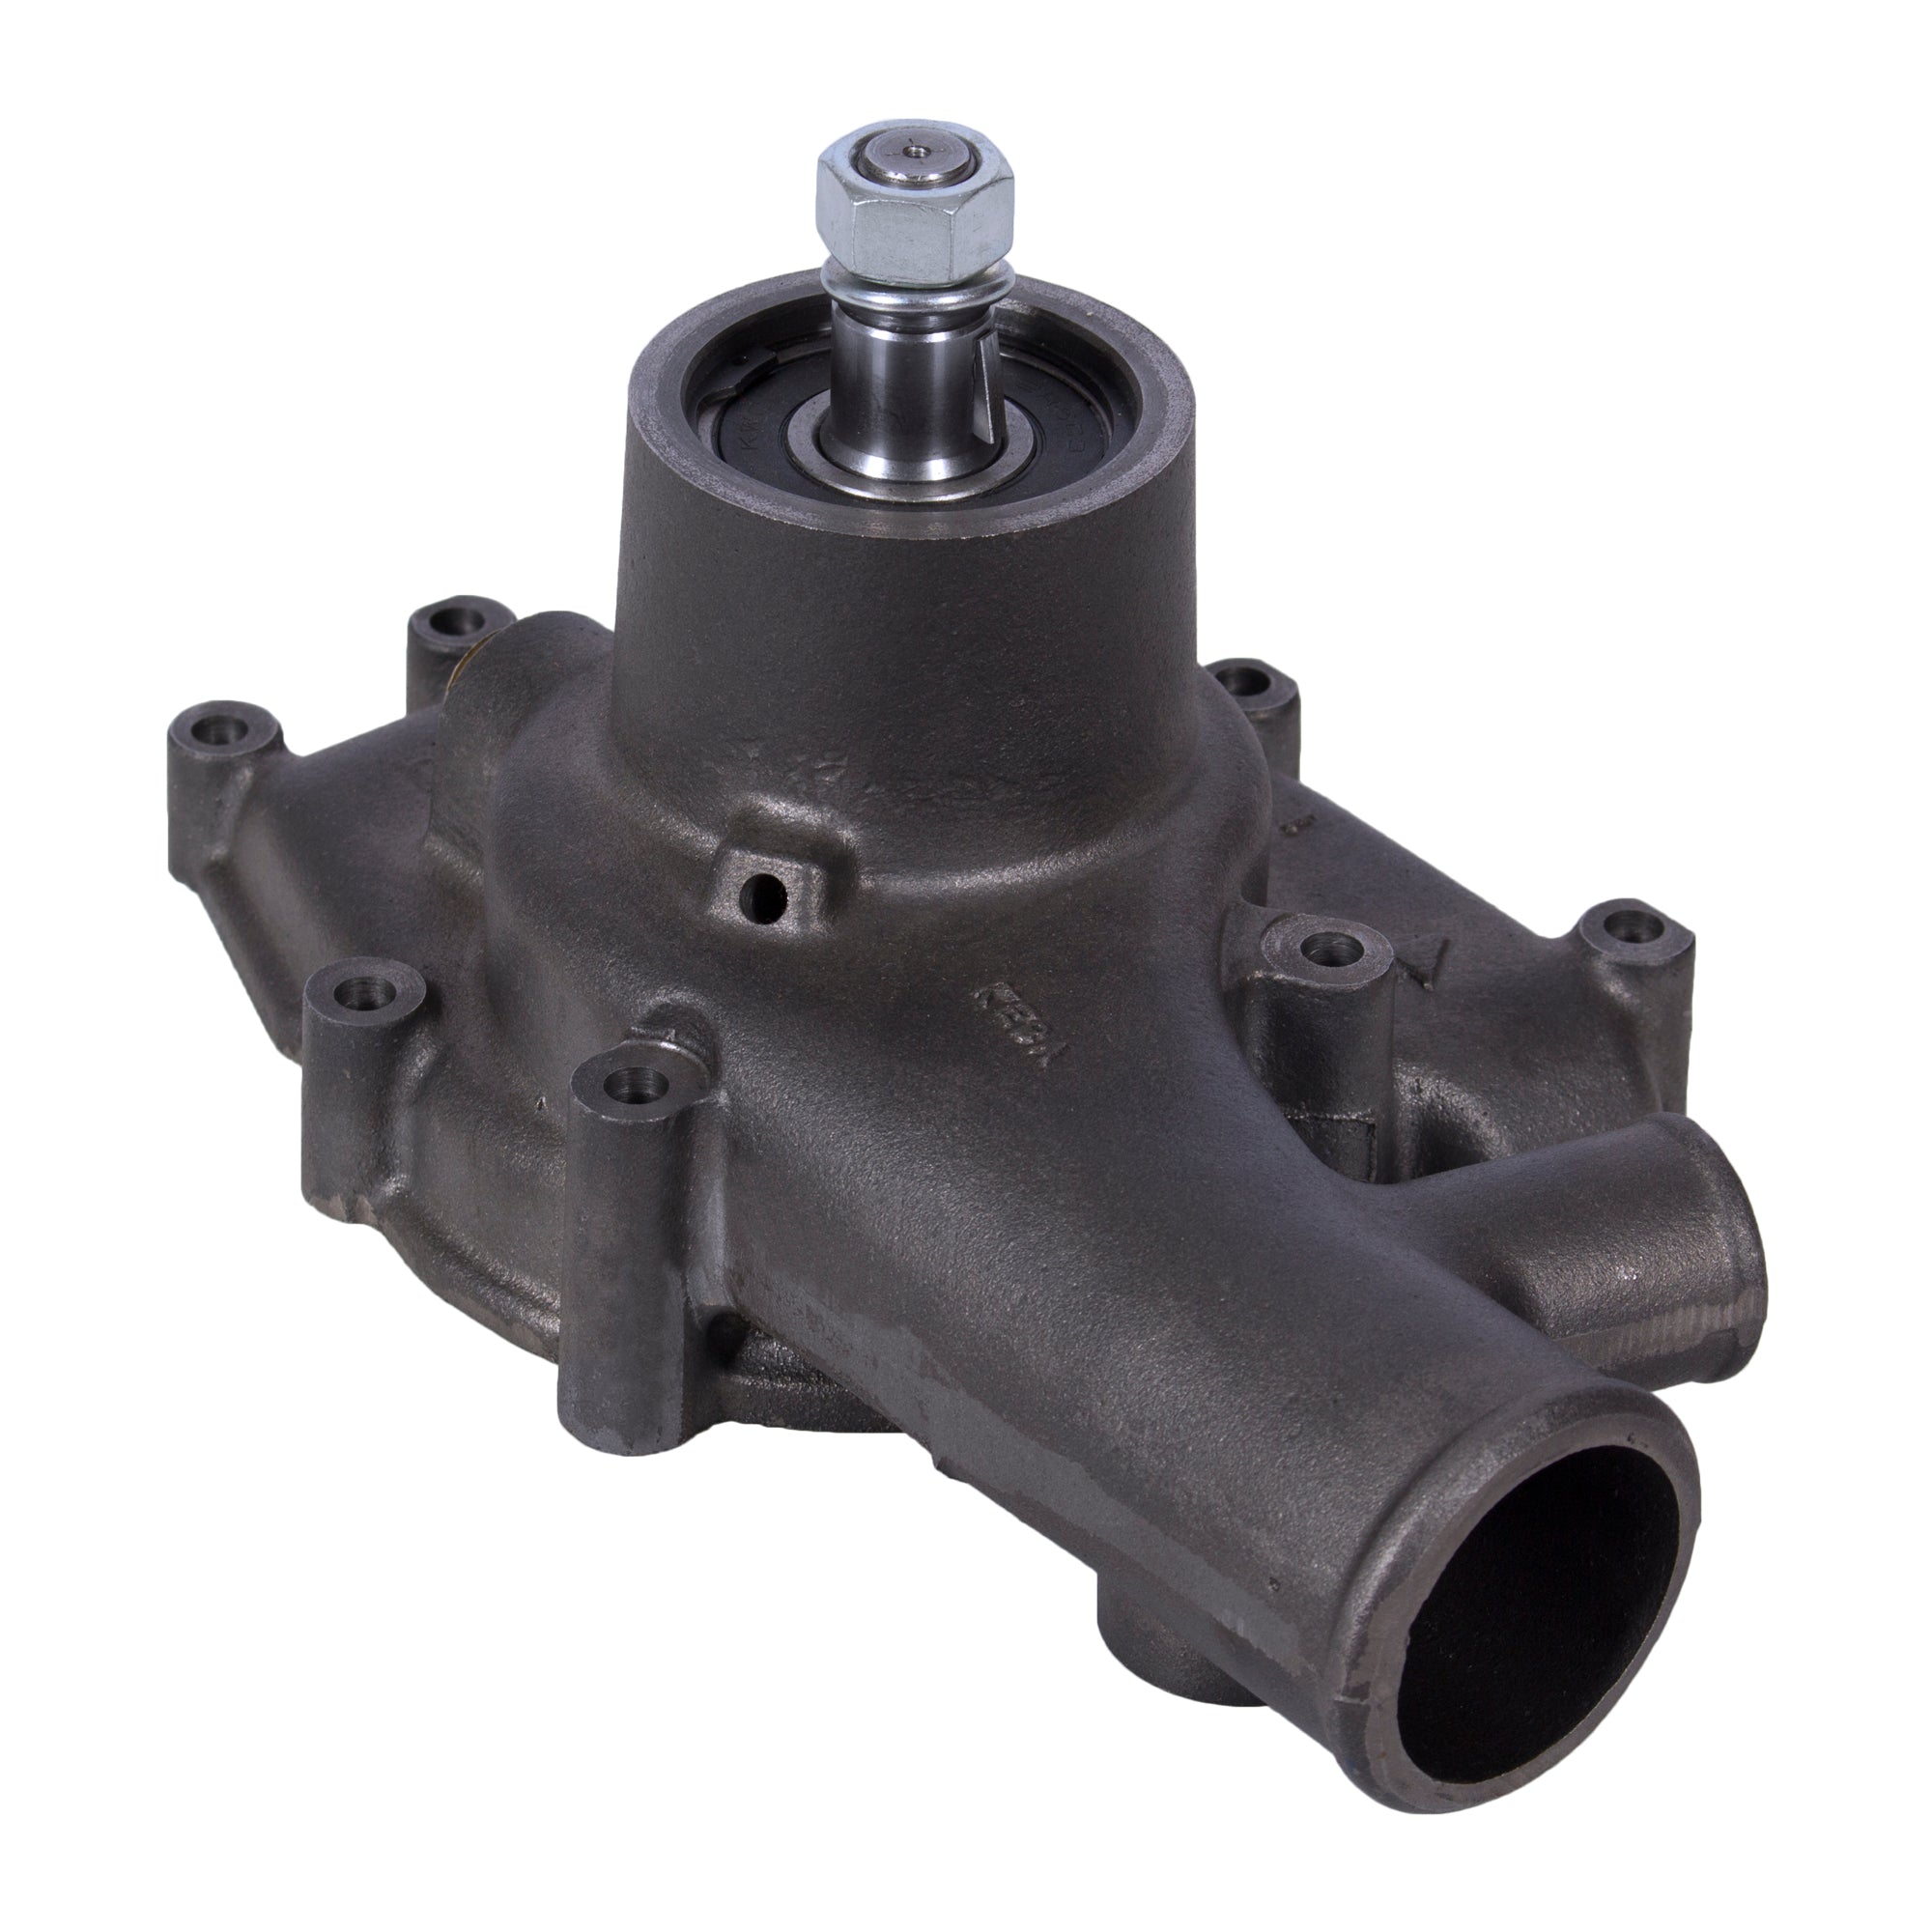 Water Pump Replacement for PERKINS - Perkins Engine - A6T.354 - U5MW0129